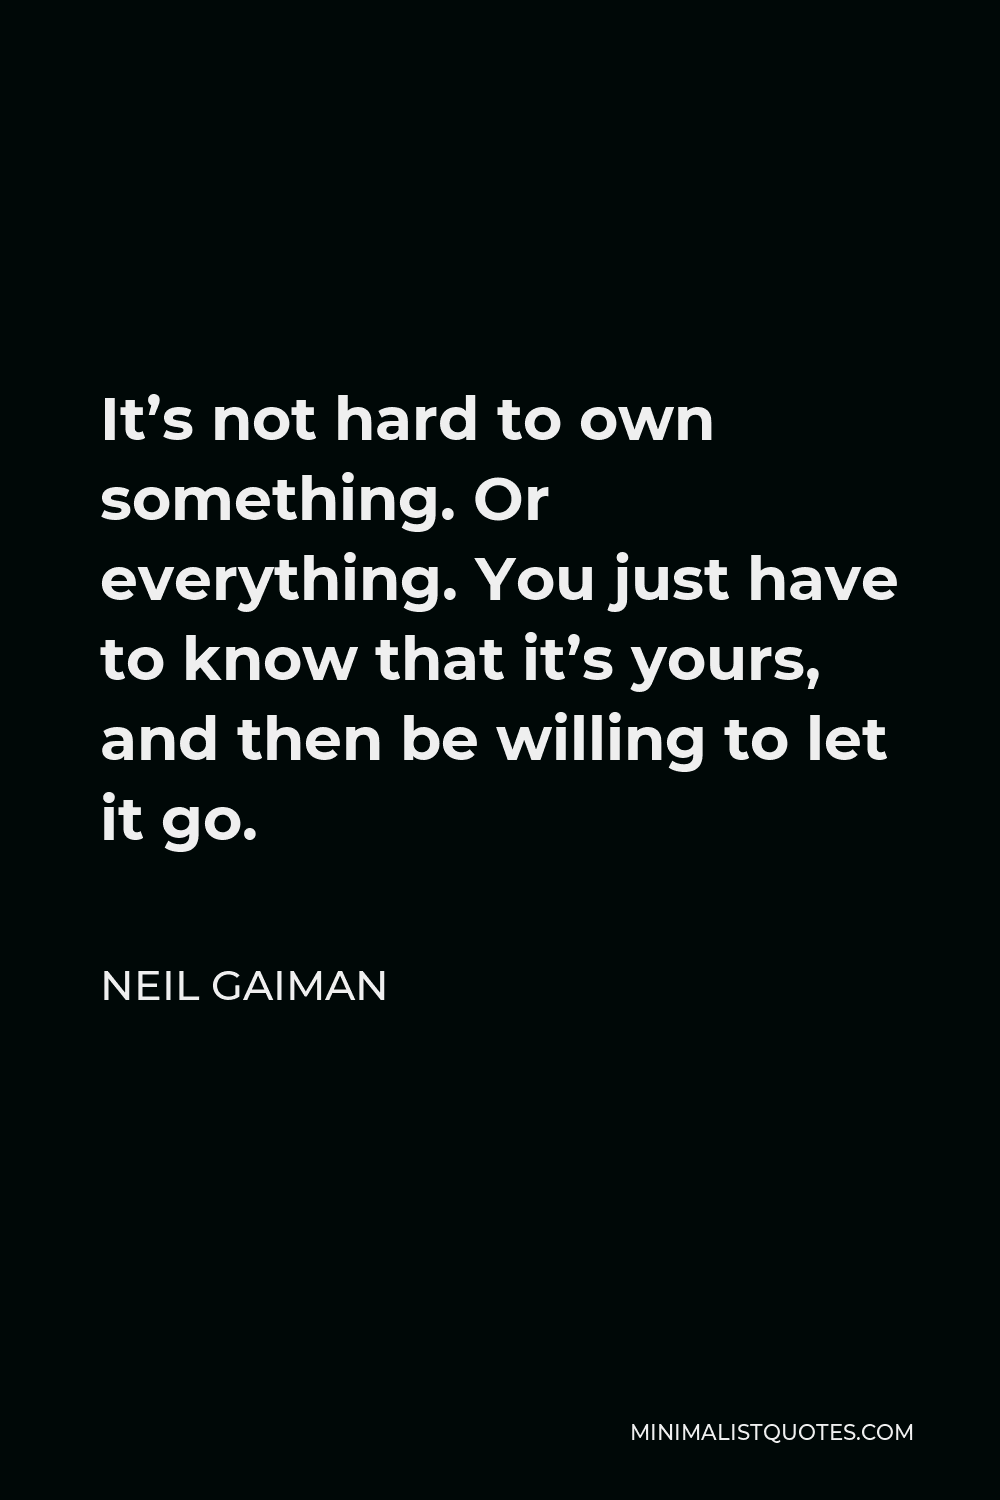 Neil Gaiman Quote: It's not hard to own something. Or everything. You ...